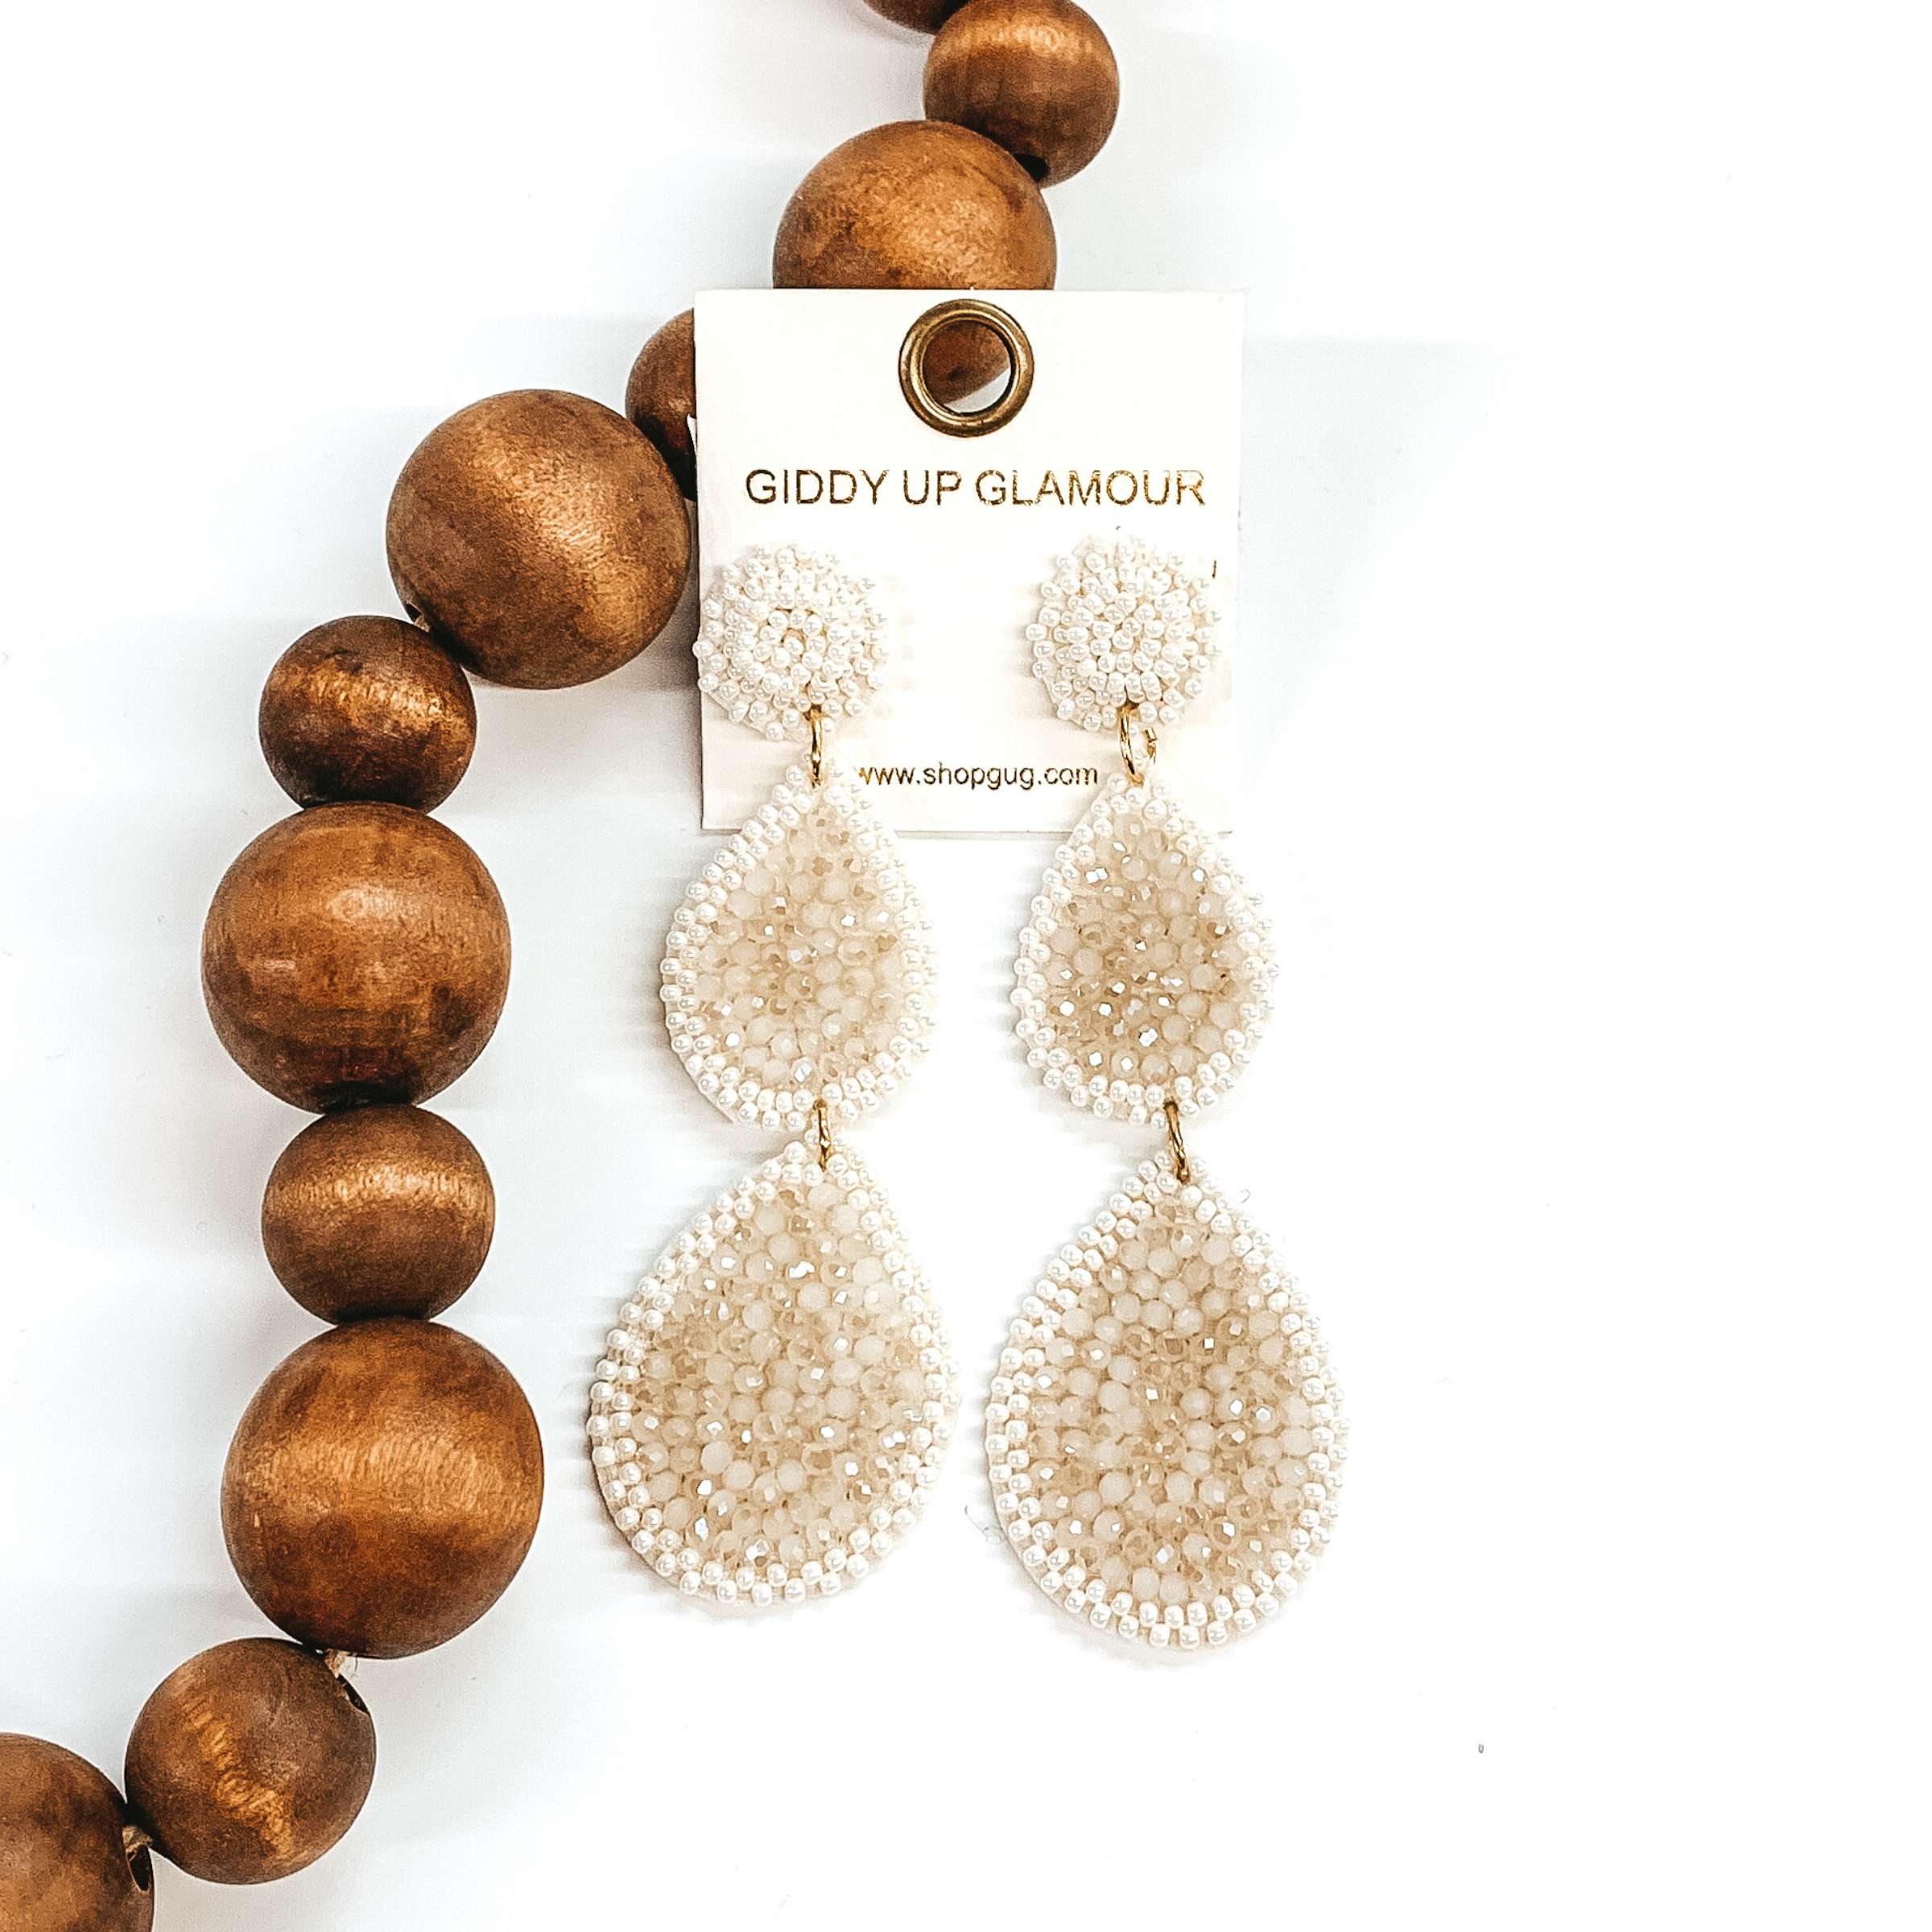 Beaded three tiered earrings in ivory. These earrings start off with a circle then has two hanging teardrops with both increasing in size as they go down. These earrings are pictured on a white background with dark brown beads on the left side of the earrings.